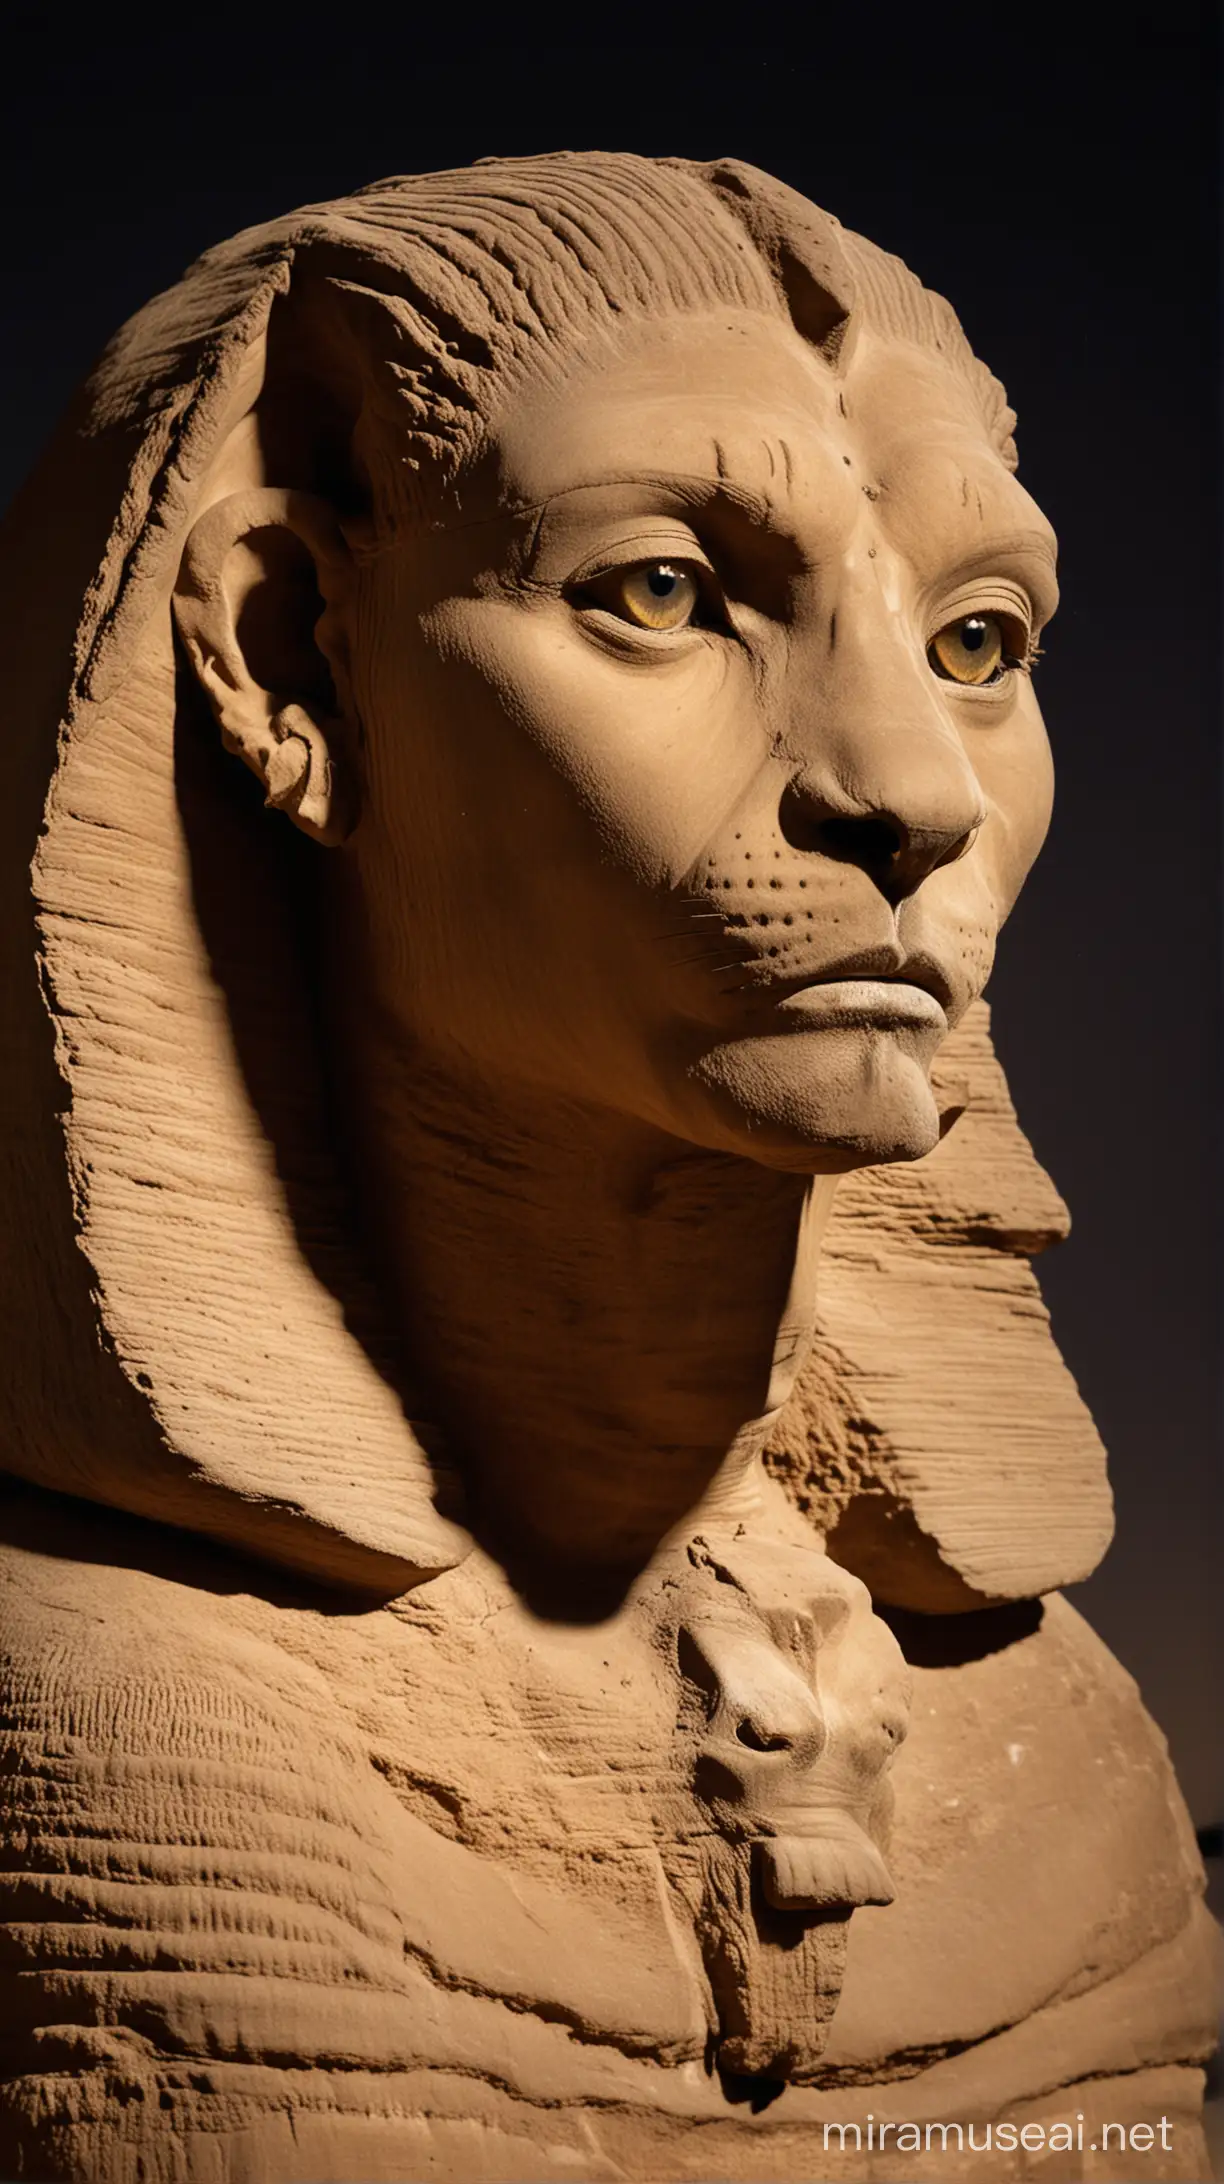 Enigmatic Sphinx with Glowing Eyes in the Shadows